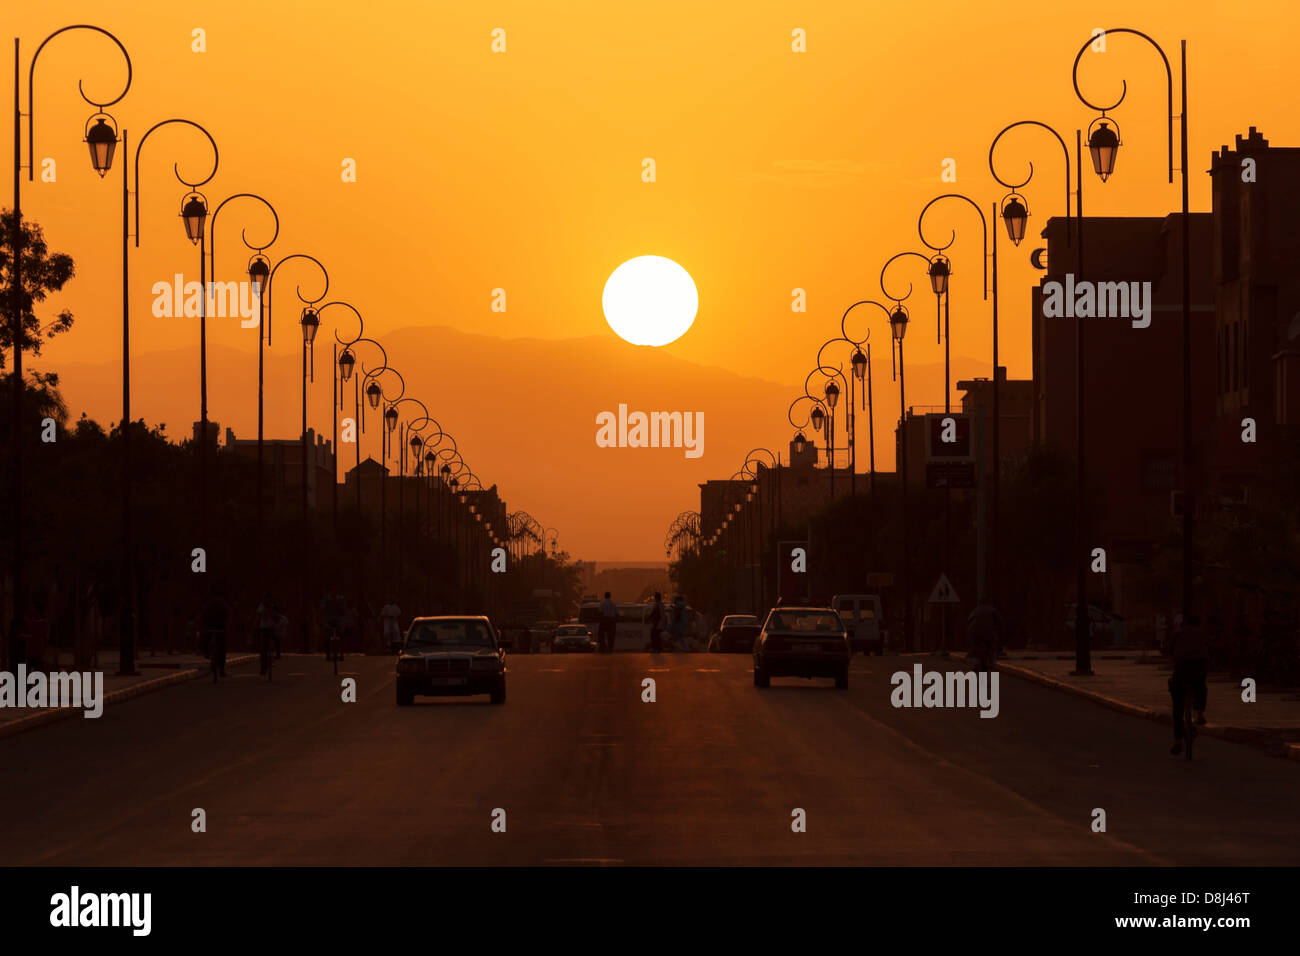 Silhouette city scene with street and street lamps against sunset. Stock Photo